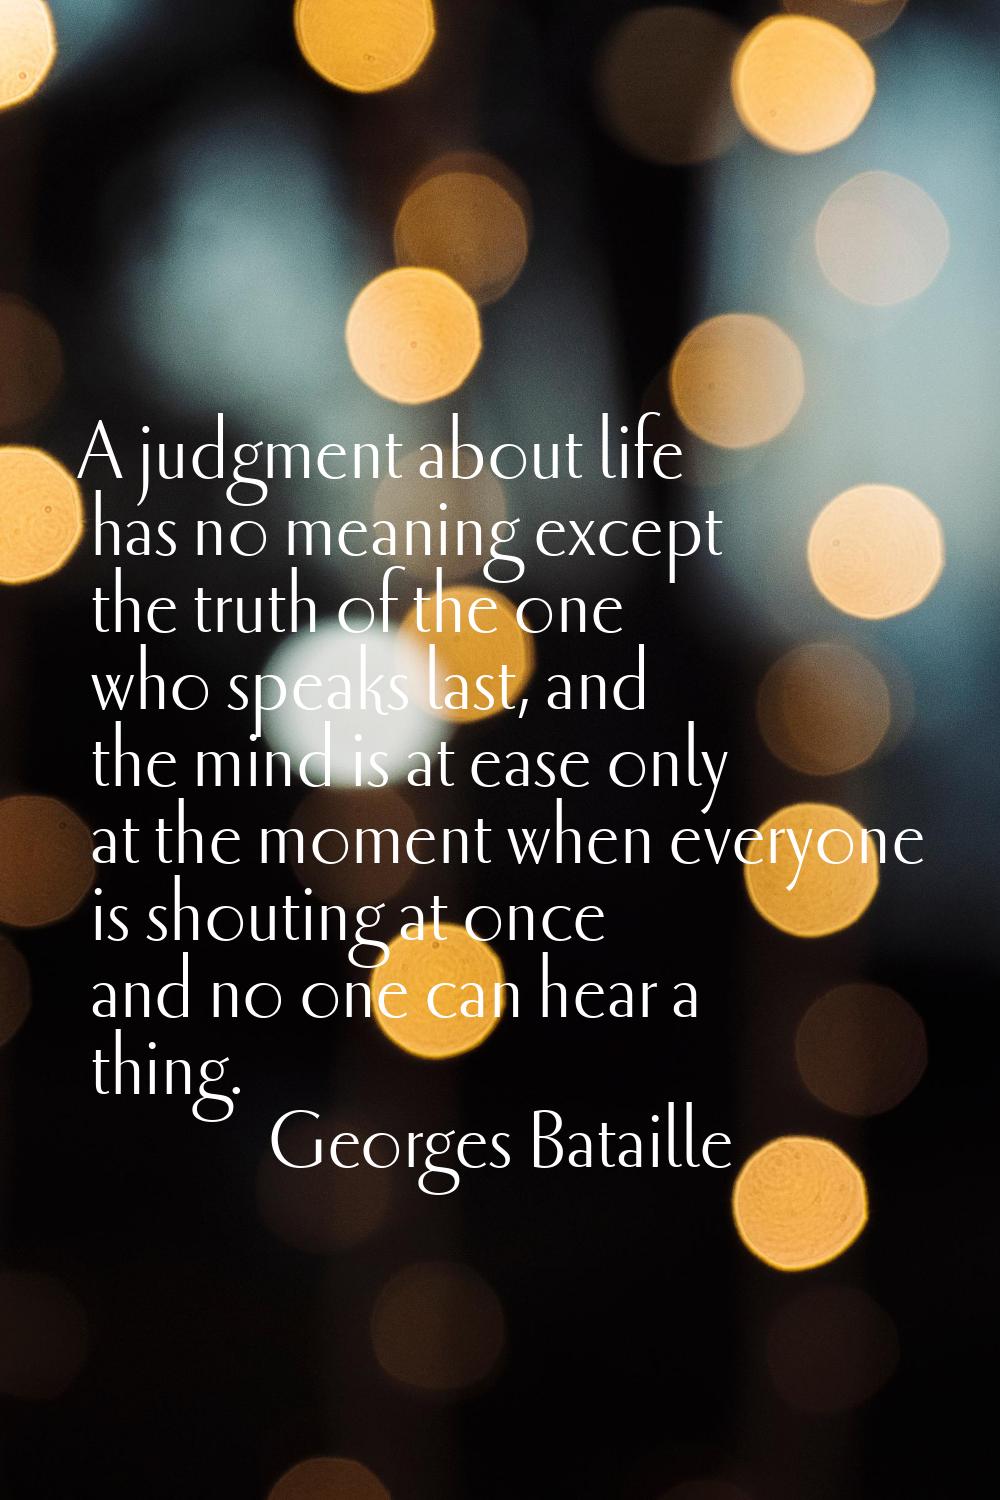 A judgment about life has no meaning except the truth of the one who speaks last, and the mind is a